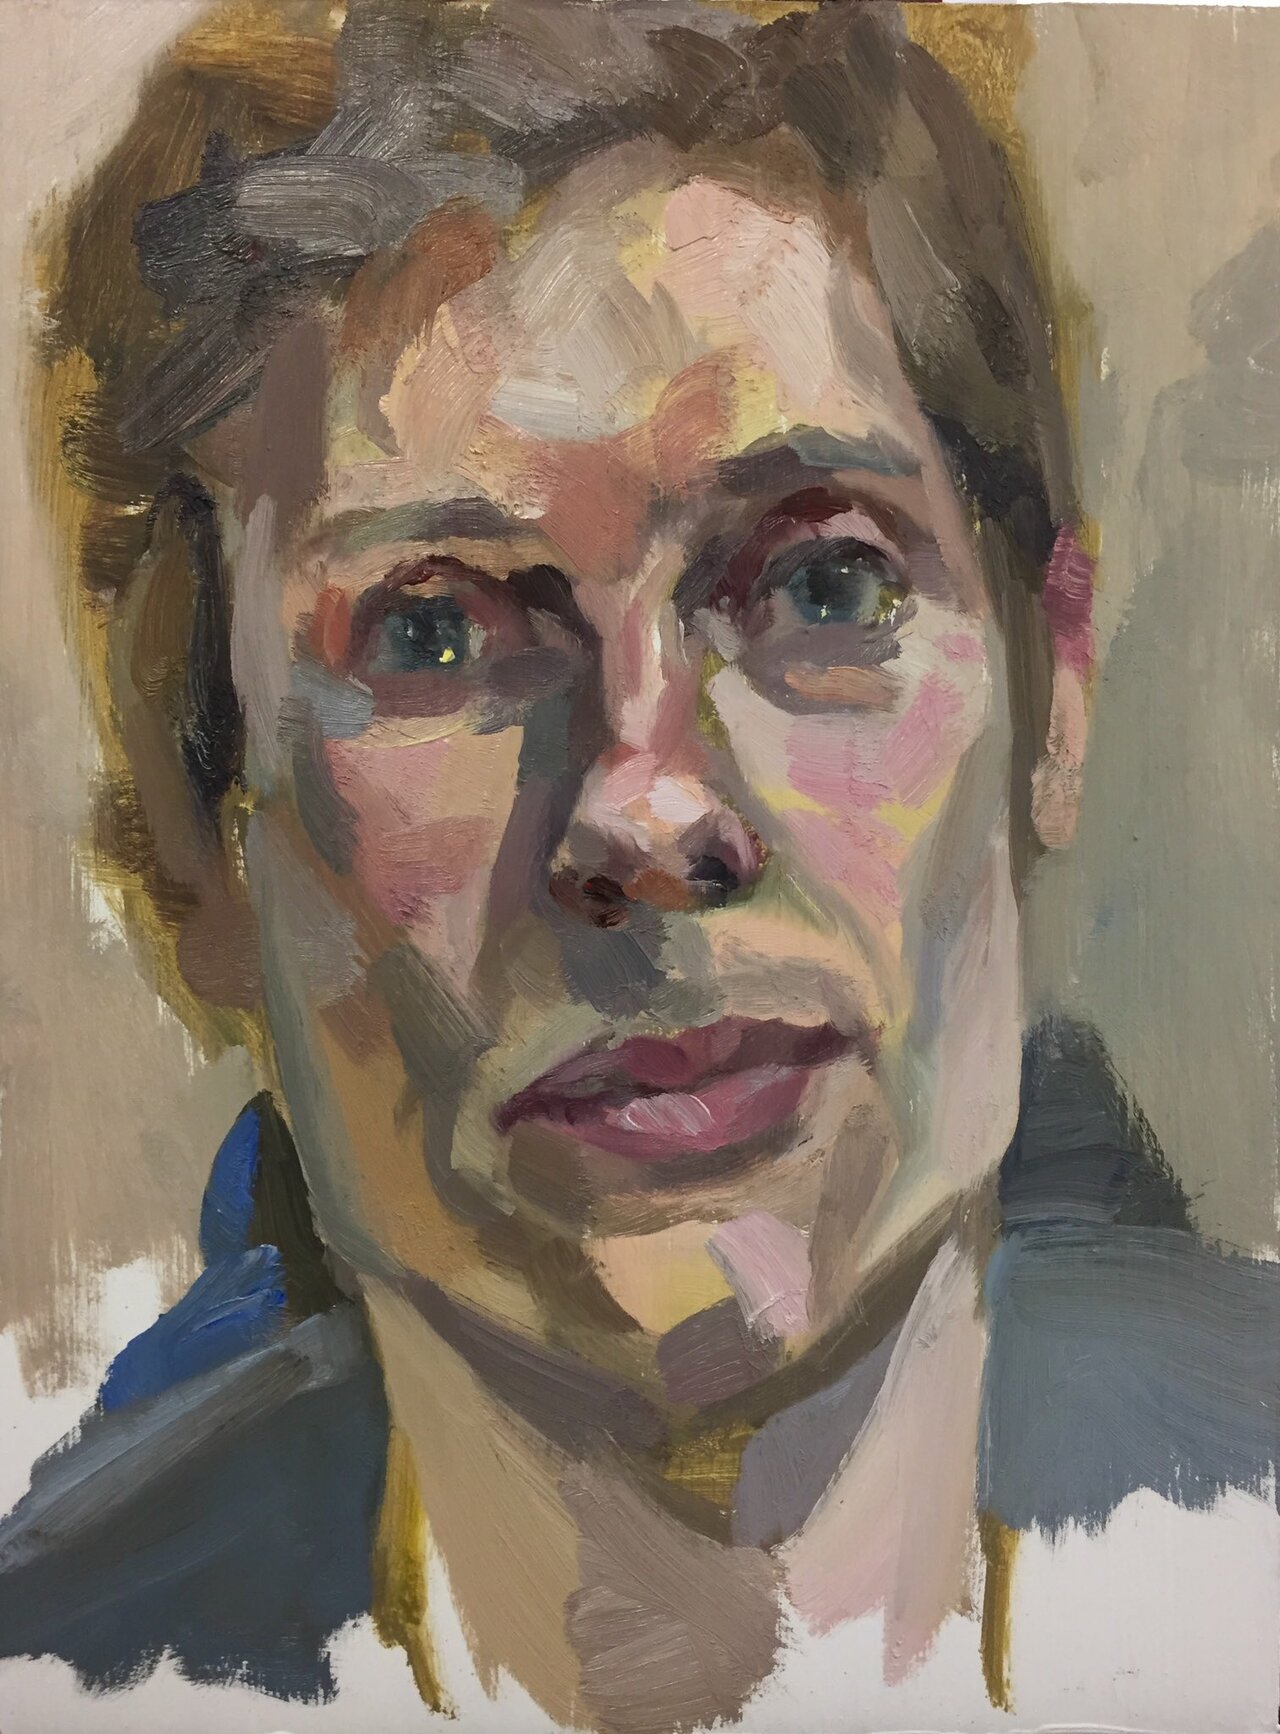 #art 'Lisa', oil on board, 16"x12". Painted this afternoon during my Expressive Portrait class at @ArtAcademy https://t.co/eyzgzzRk66